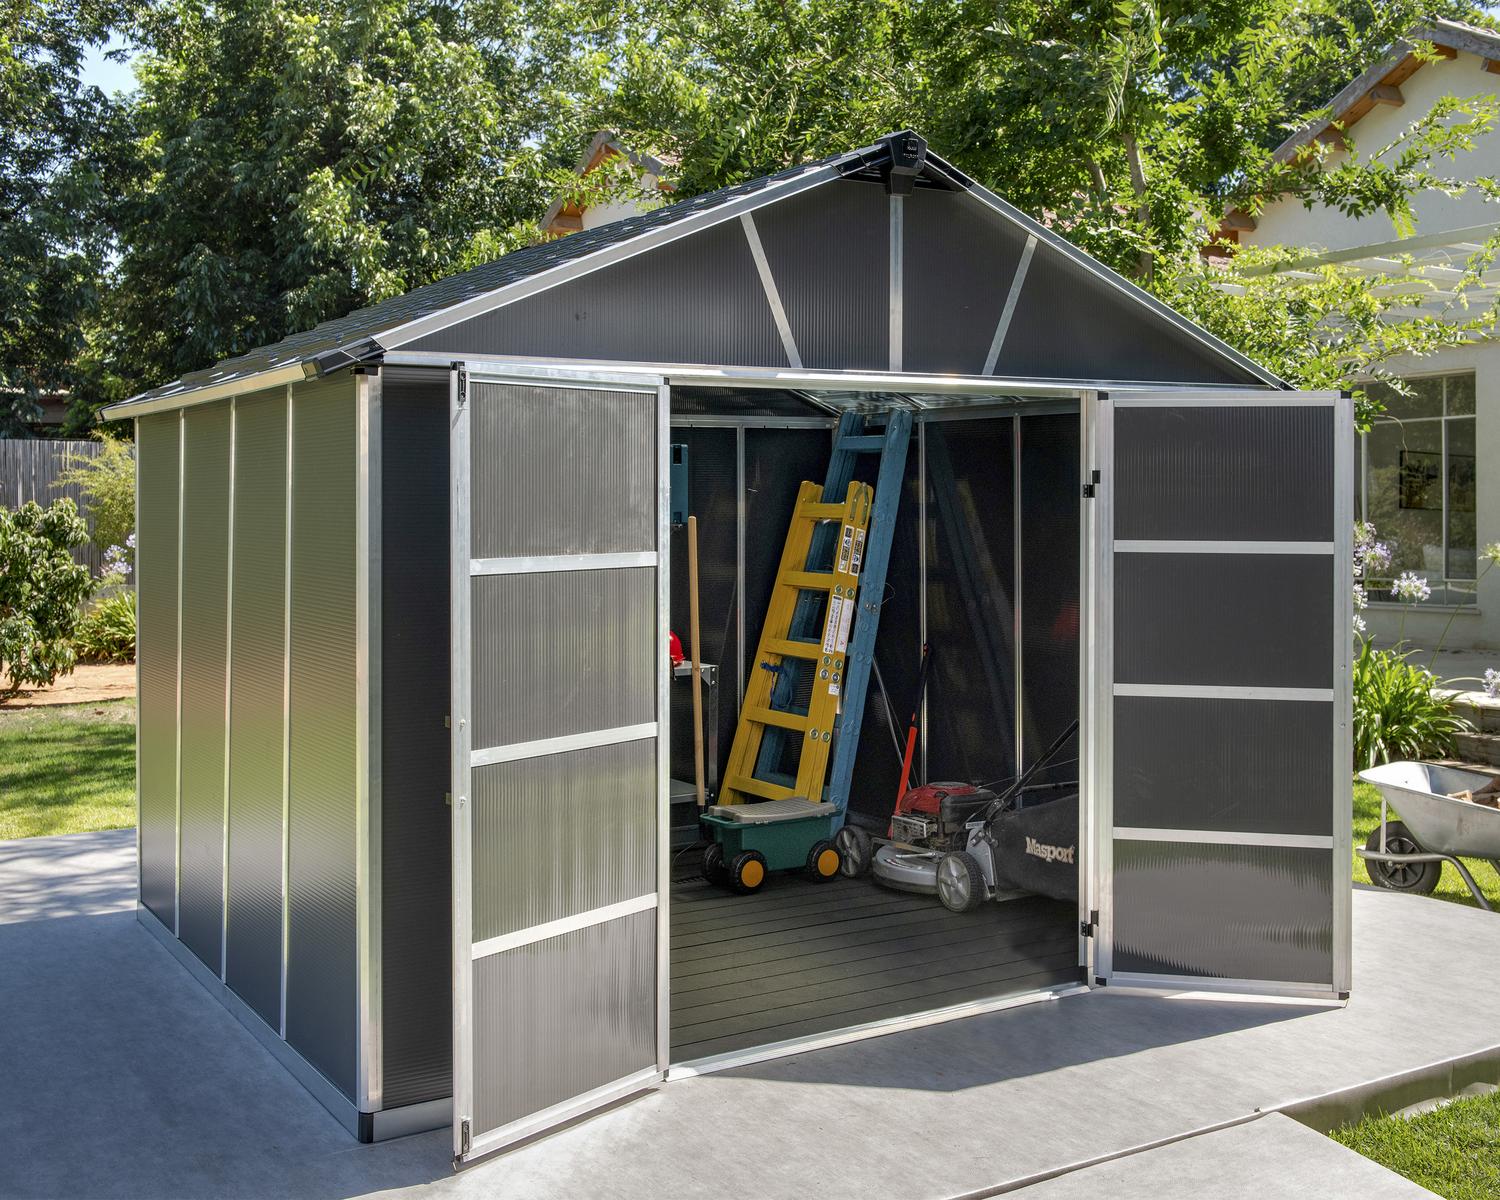 Large Storage Shed With Out Floor Yukon 11 ft. x 9 ft. - Grey Polycarbonate Panels And Aluminium Frame